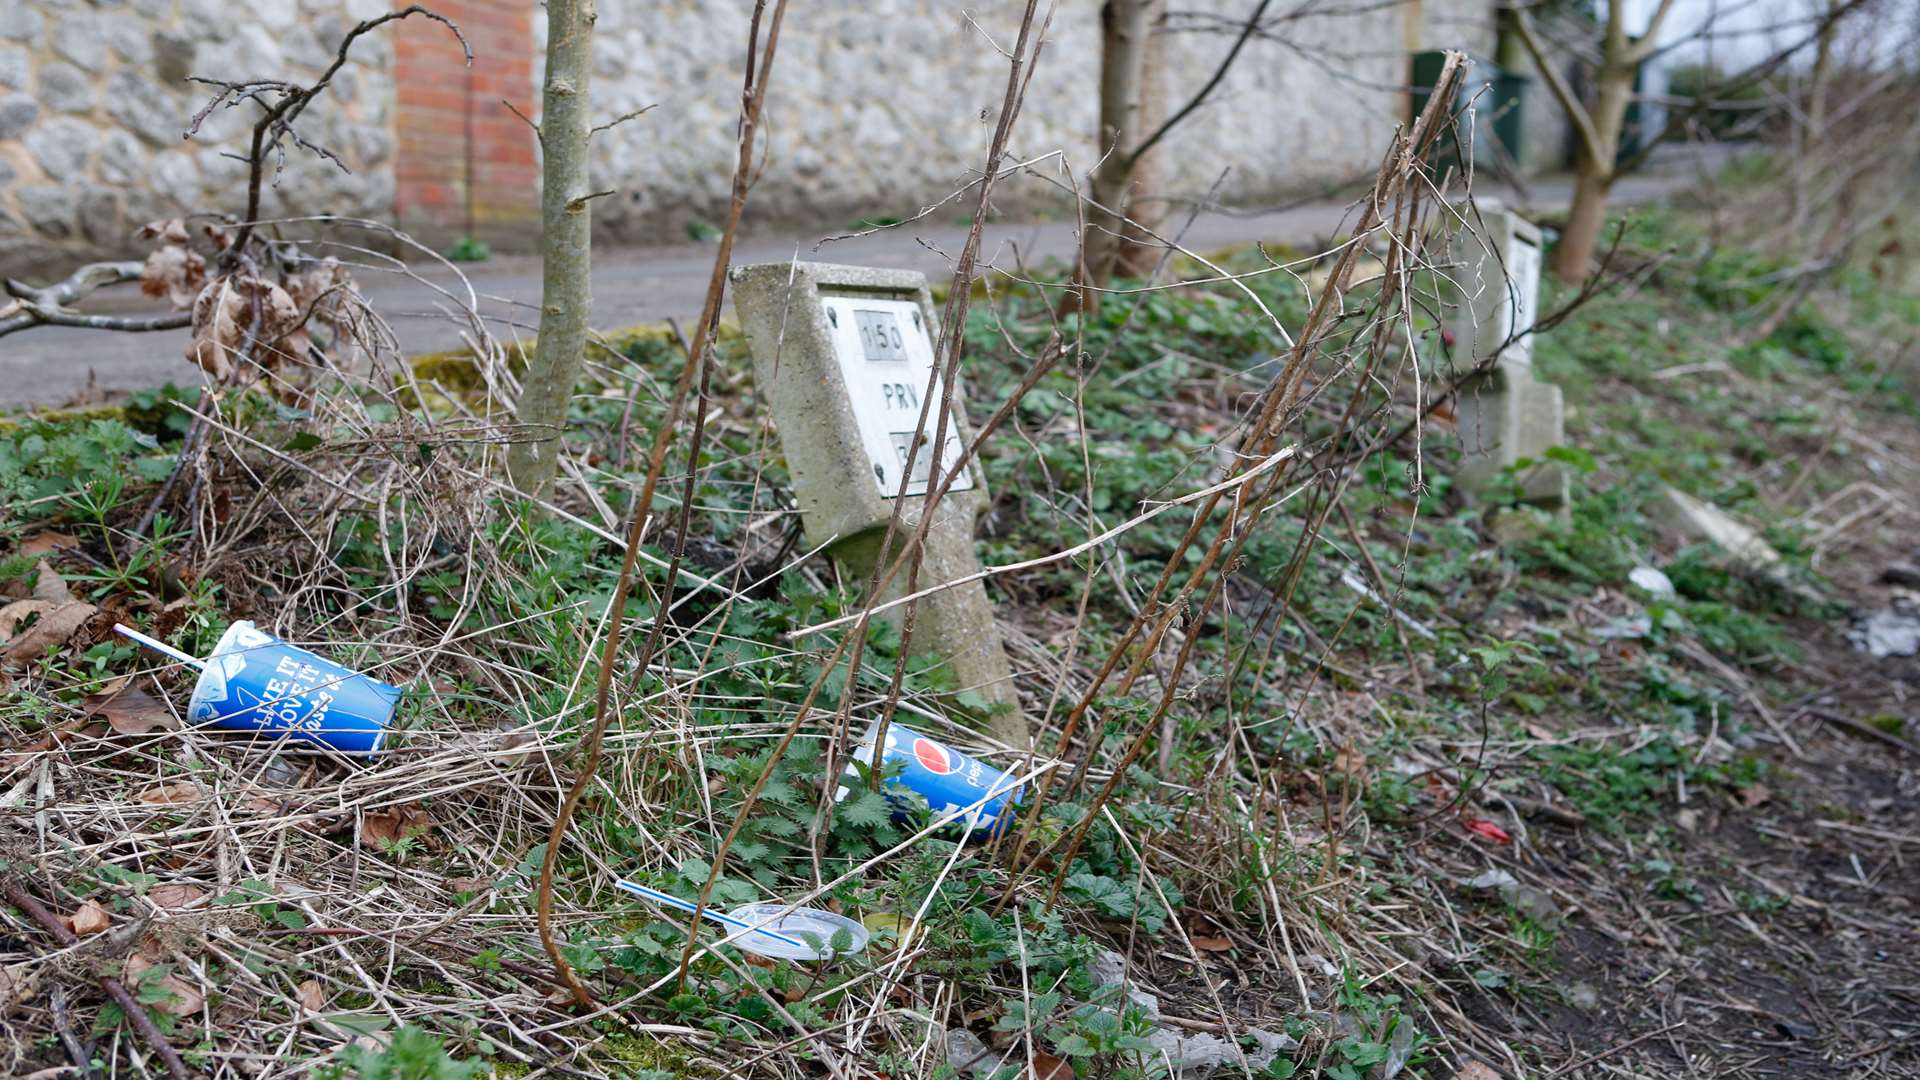 Litter like this on Sandling Road, Maidstone, is a blight on roads across the county